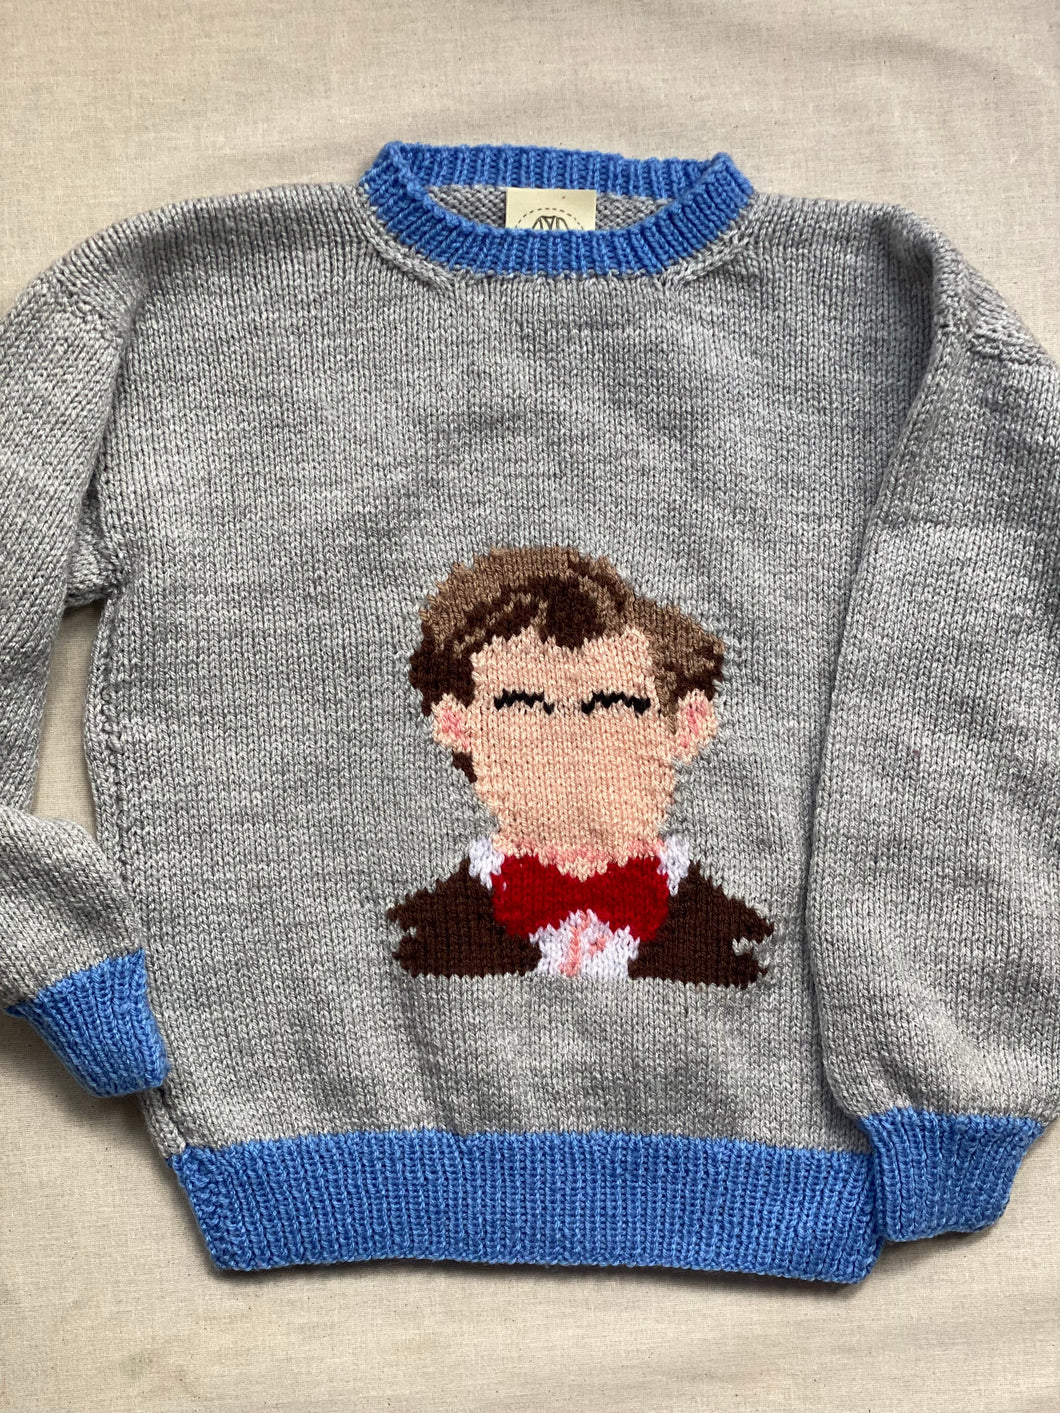 6-7 years - Doctor Who jumper